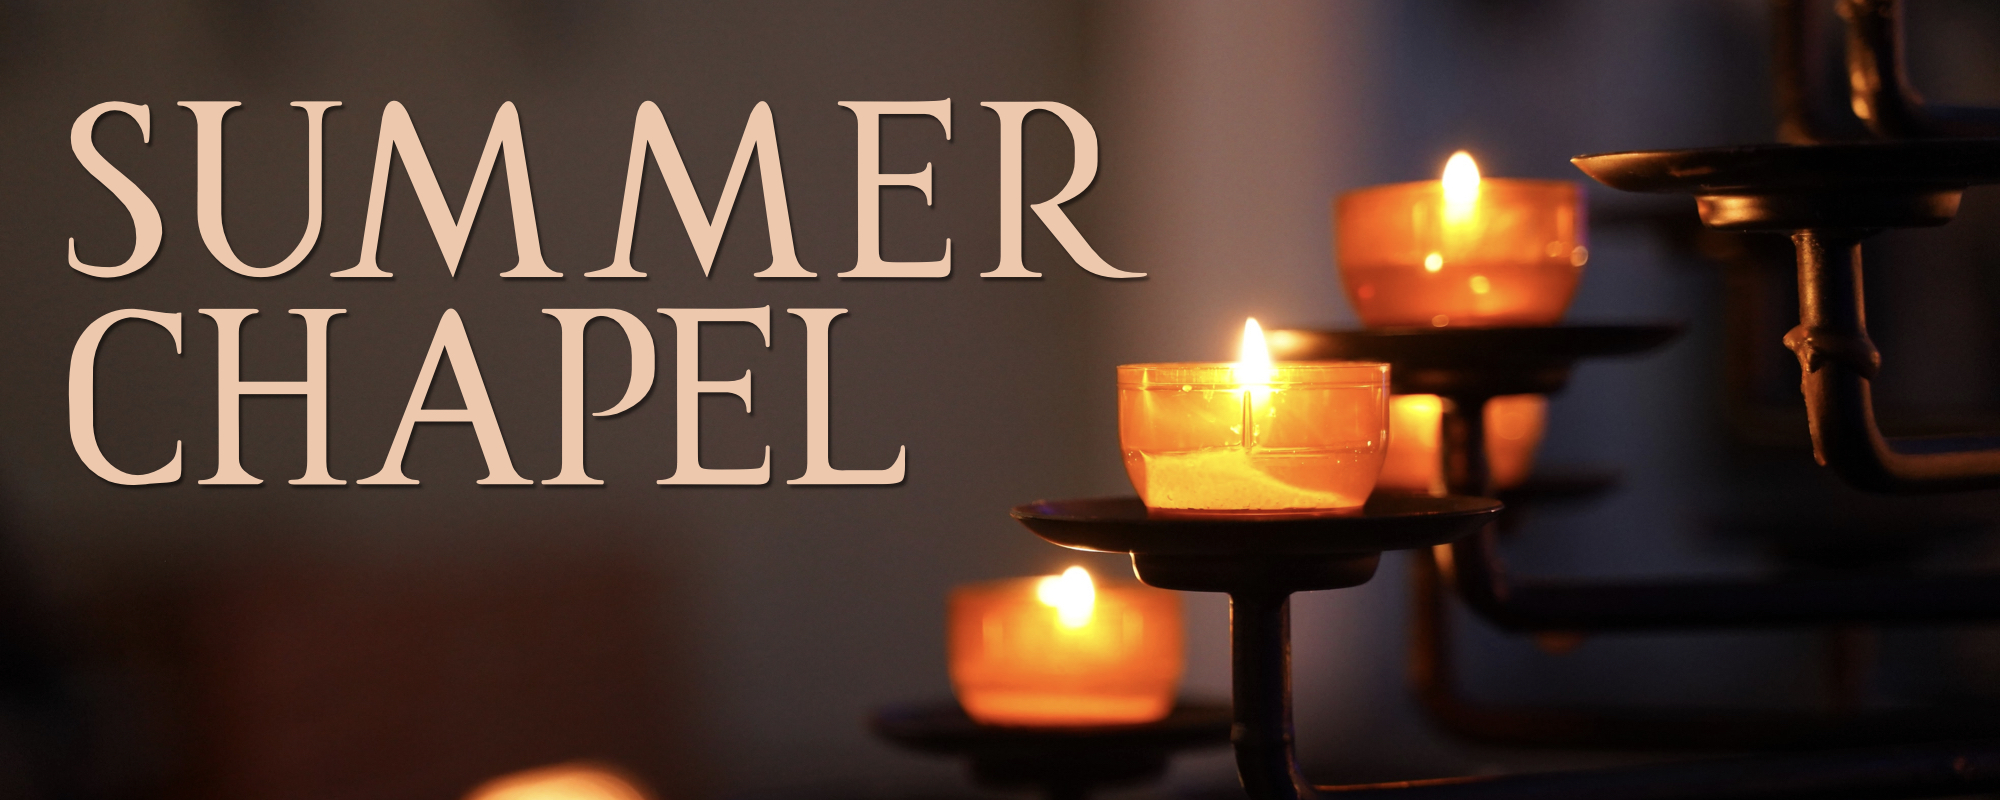 Summer Chapel Order of Worship for July 16th